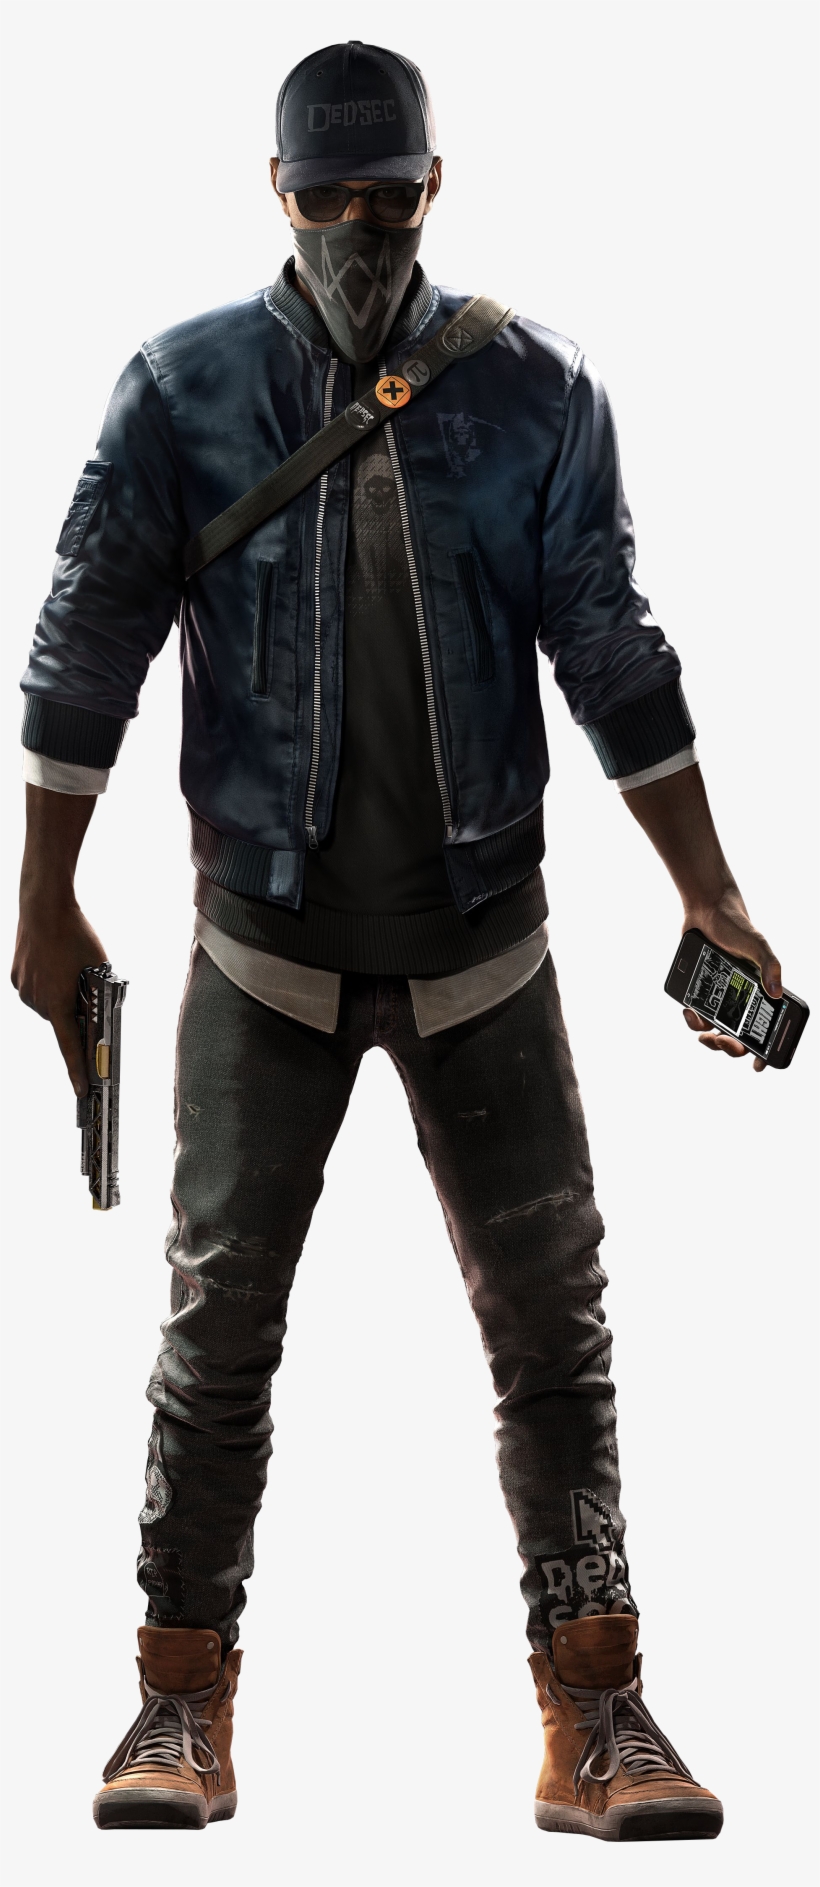 Marcus Holloway - Marcus Watch Dogs 2, transparent png #798166